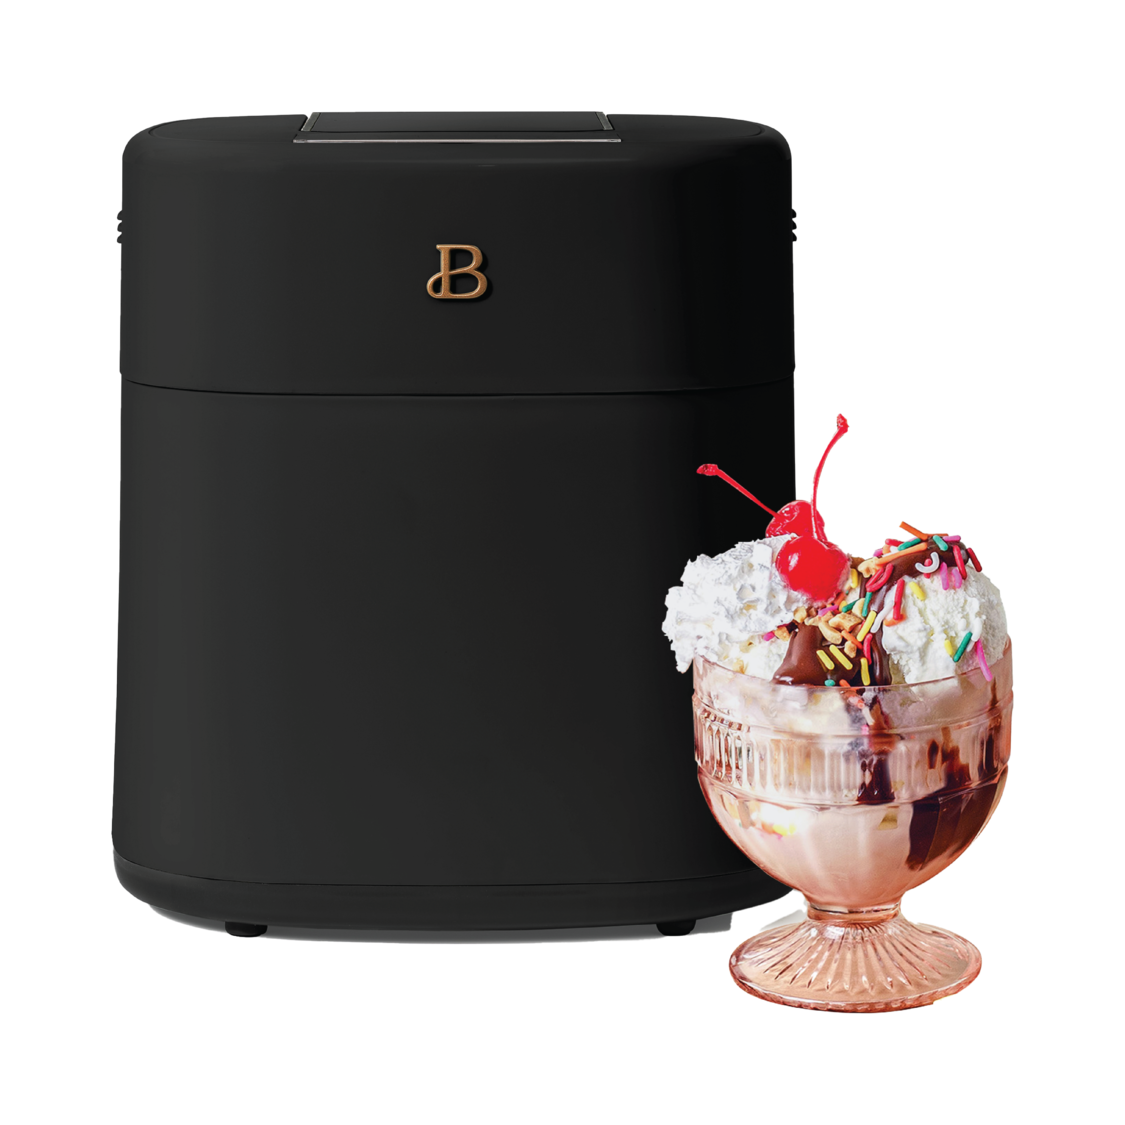 New Magic Personal Ice Cream Maker As Seen On TV Shake To Make Ice